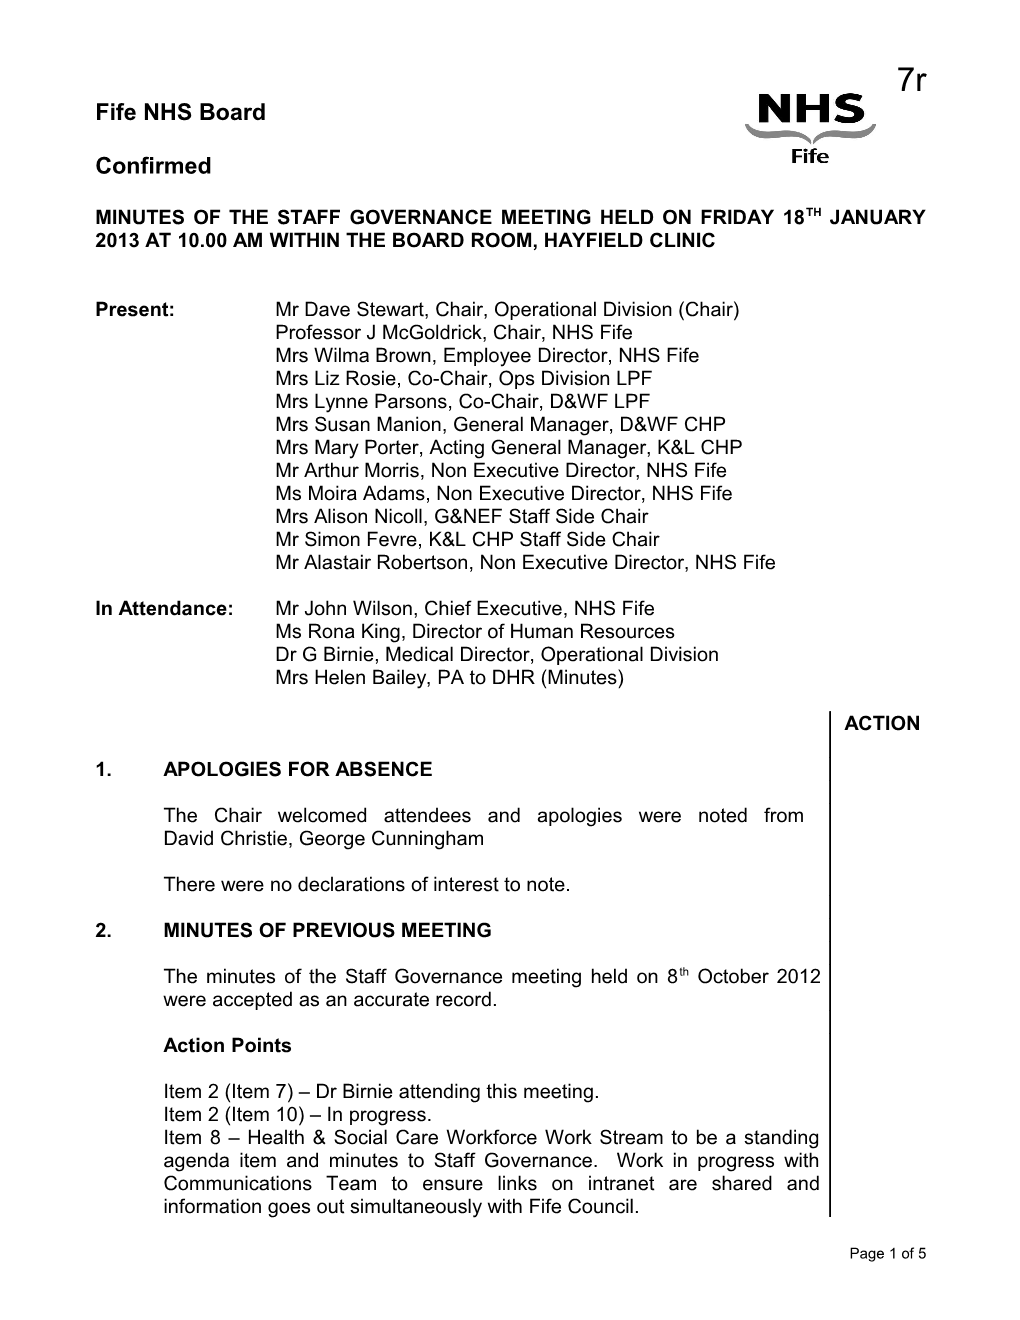 Minutes of a Meeting of the Redesign Board Held on Thursday, 22 Nd December, 2005 at 4